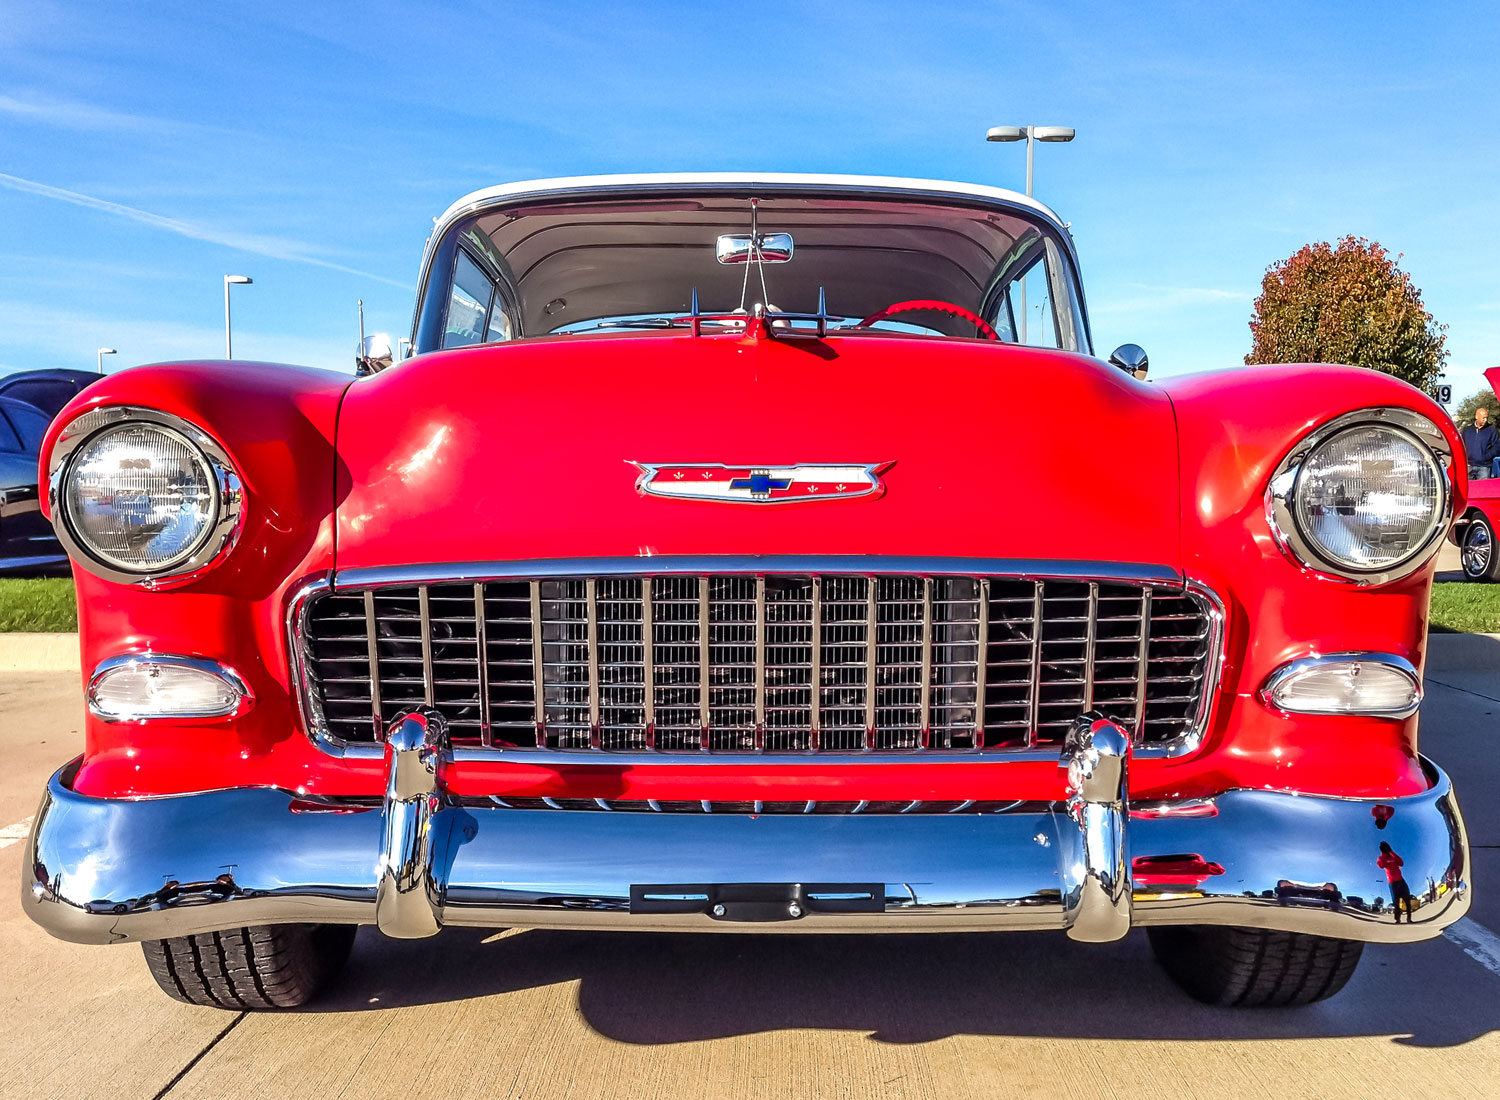 CARS-AND-COFFEE-DALLAS-CLASSIC-CAR-SHOW-PLANO-MAGAZINE-1955-CHEVY-BEL-AIR